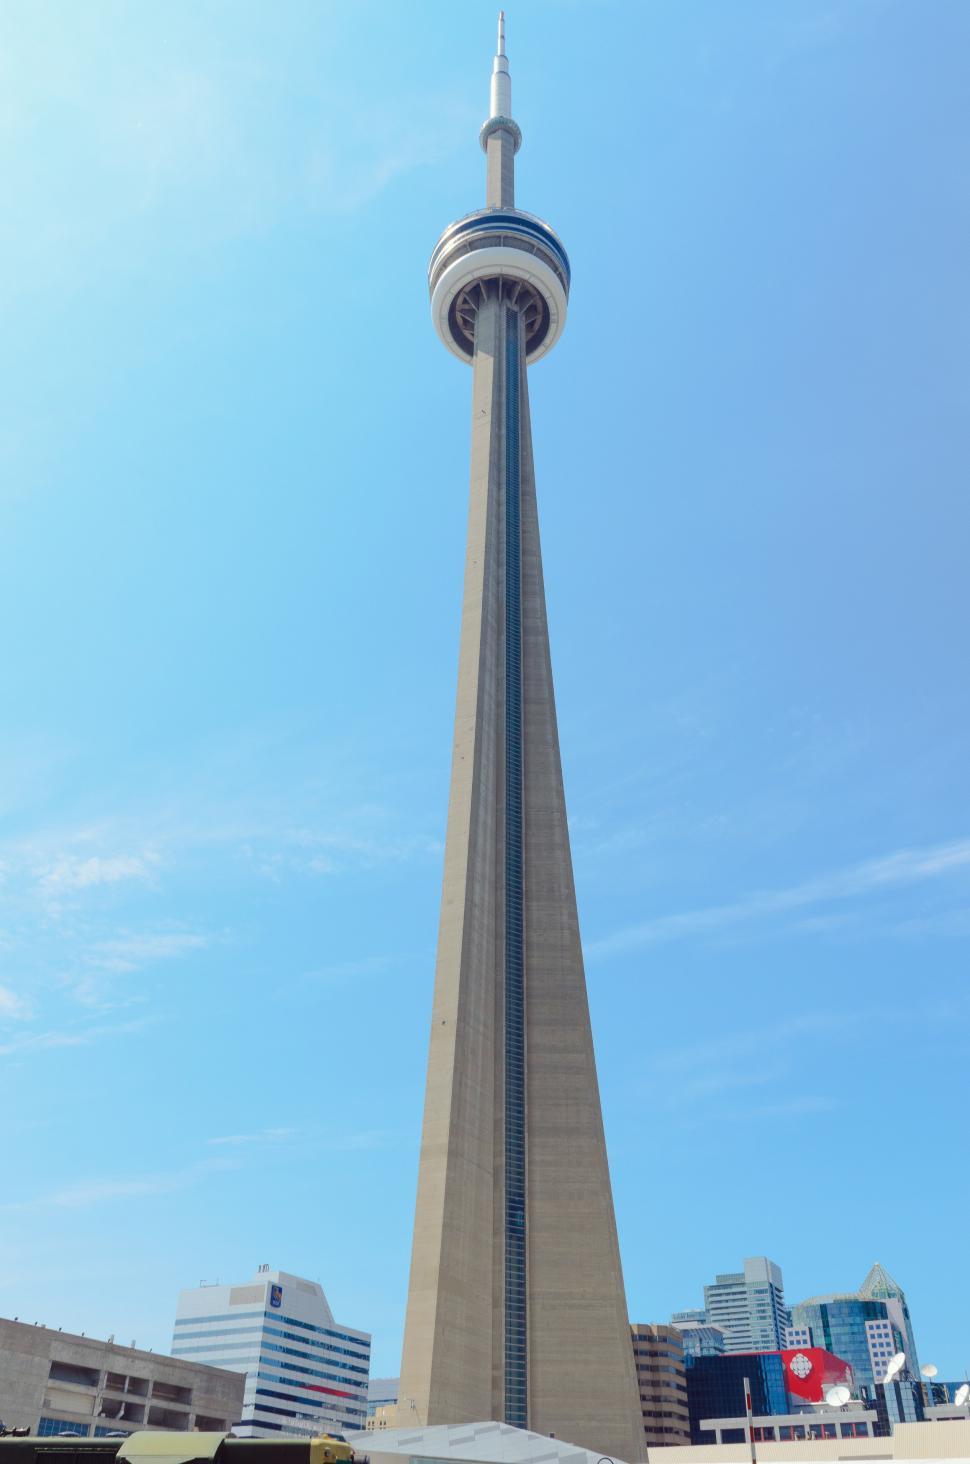 Free Image of Tower With Clock on Side 